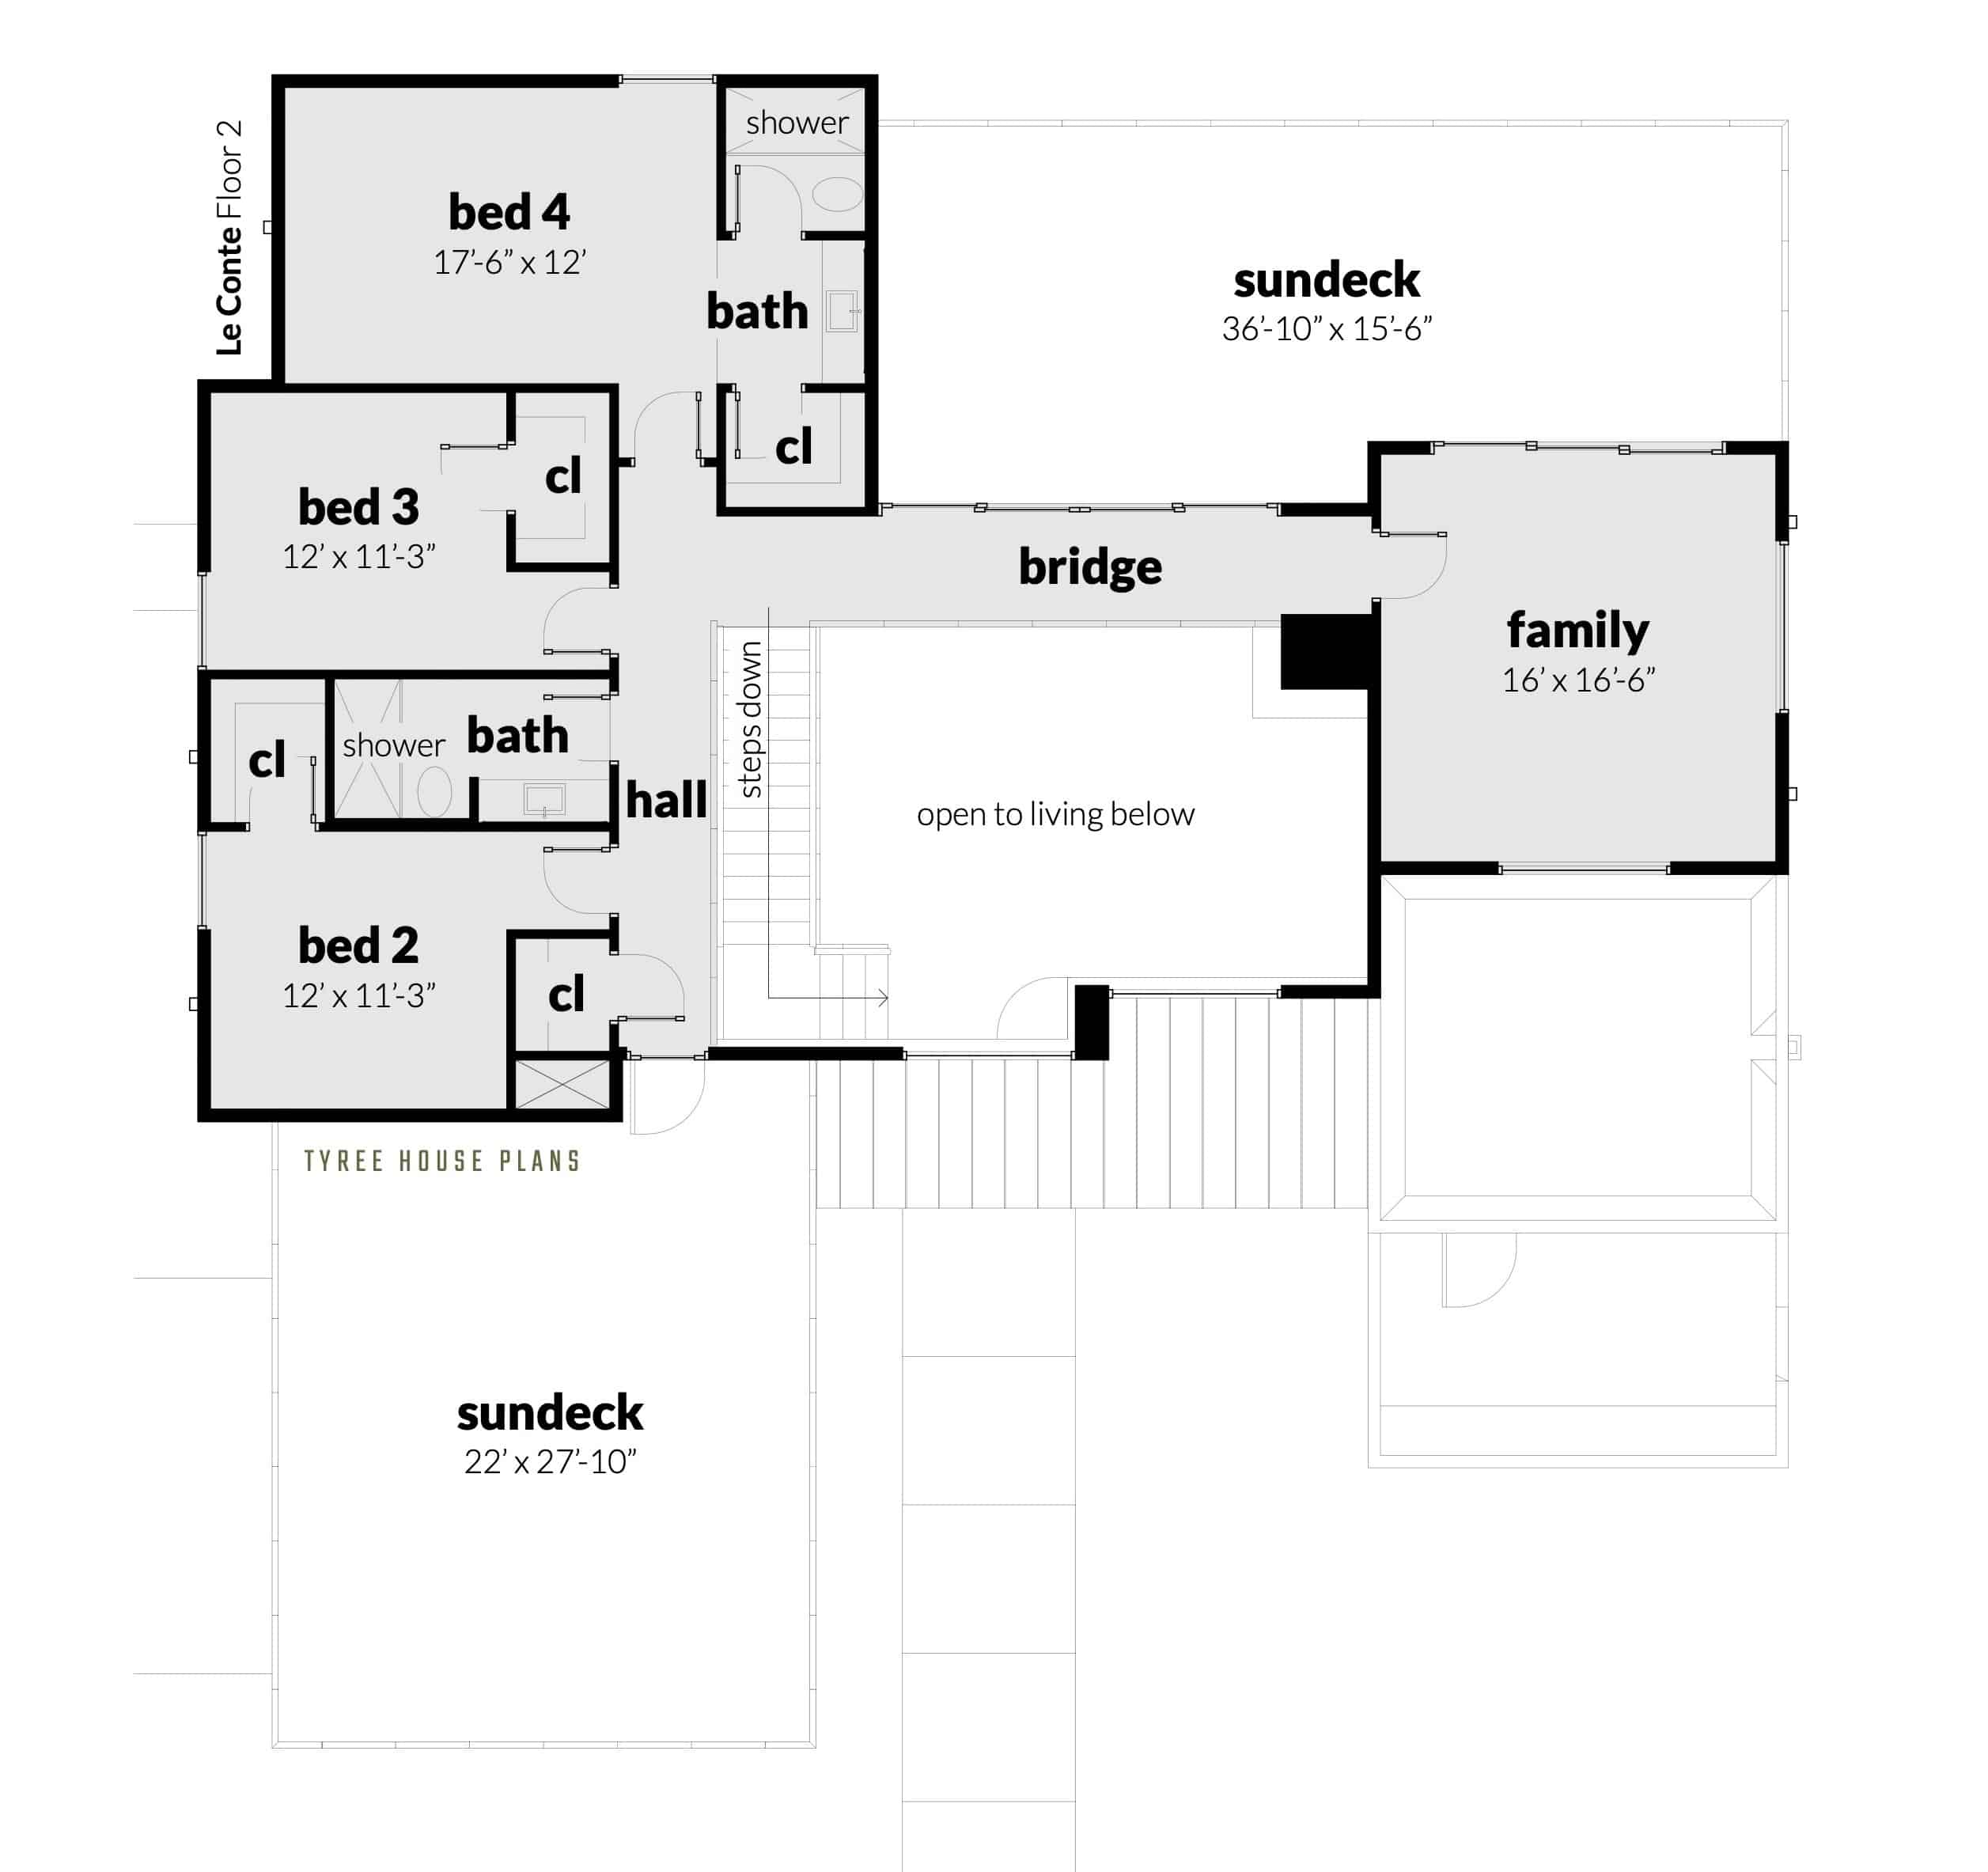 Floor 2 - Le Conte House Plan by Tyree House Plans